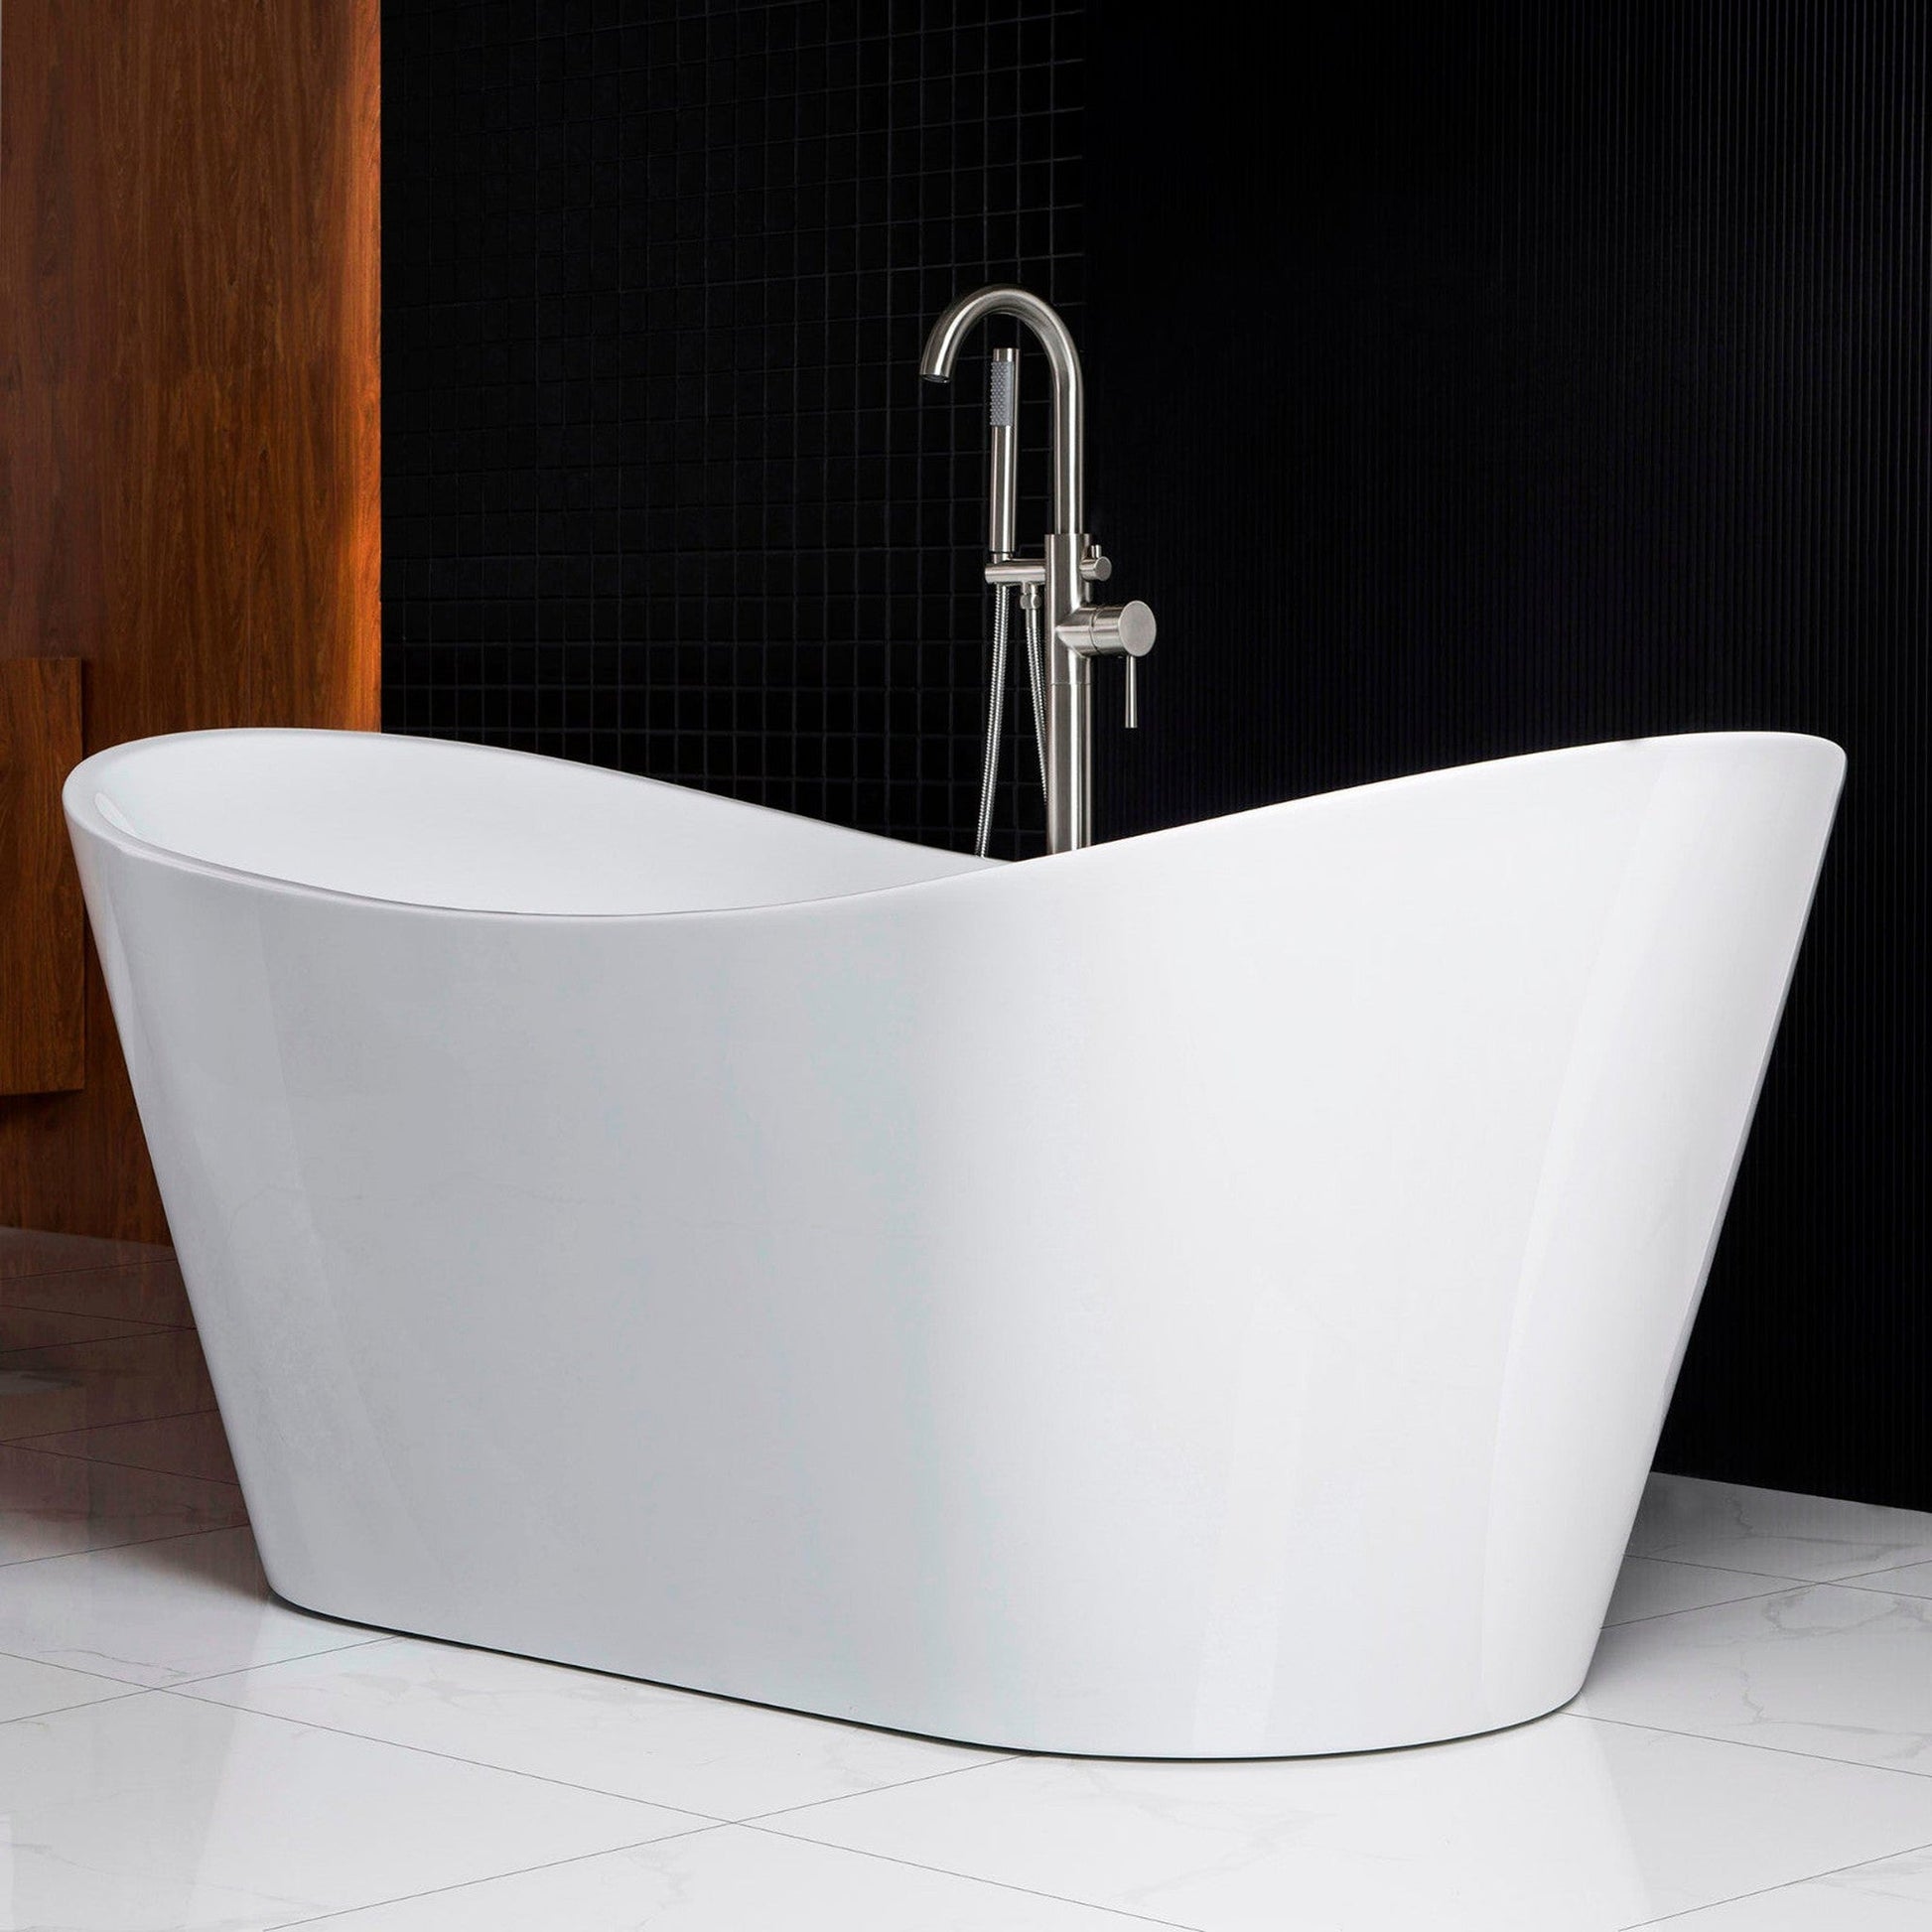 WoodBridge B0010 67" White Acrylic Freestanding Contemporary Soaking Bathtub With Brushed Nickel Drain, Overflow, F-0018BN Tub Filler and Caddy Tray